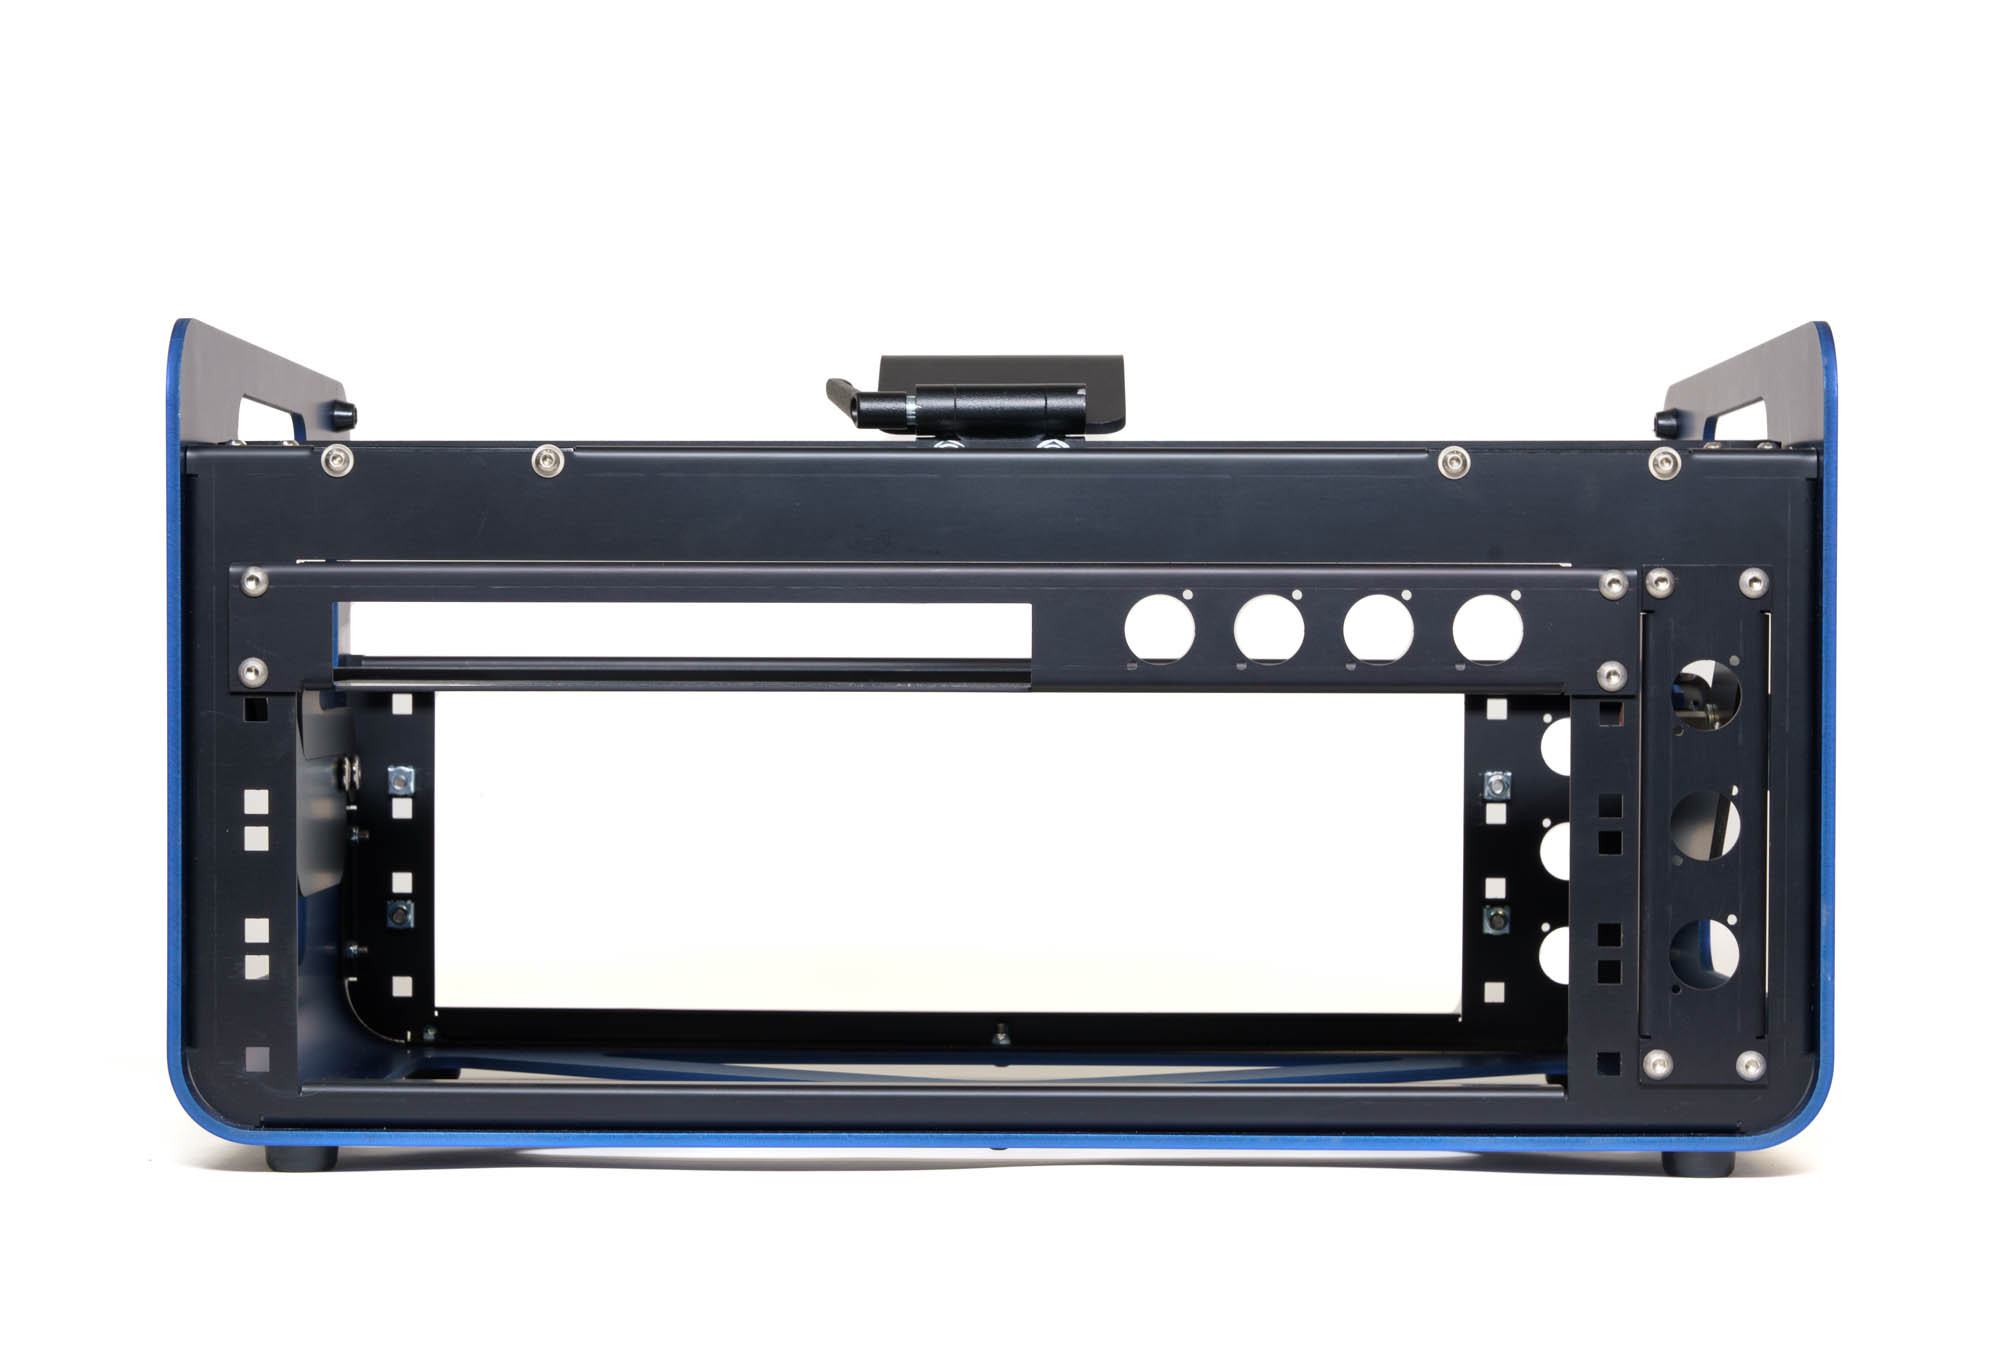 Backside: 7 Pre-punched holes support standard panel/chassis mount connectors (ie: XLR, Neutrik D-Series, Speakon, etc. like HDMI, XLR, USB or Ethernet. The smaller rectangular opening is for a switch and/or Router.